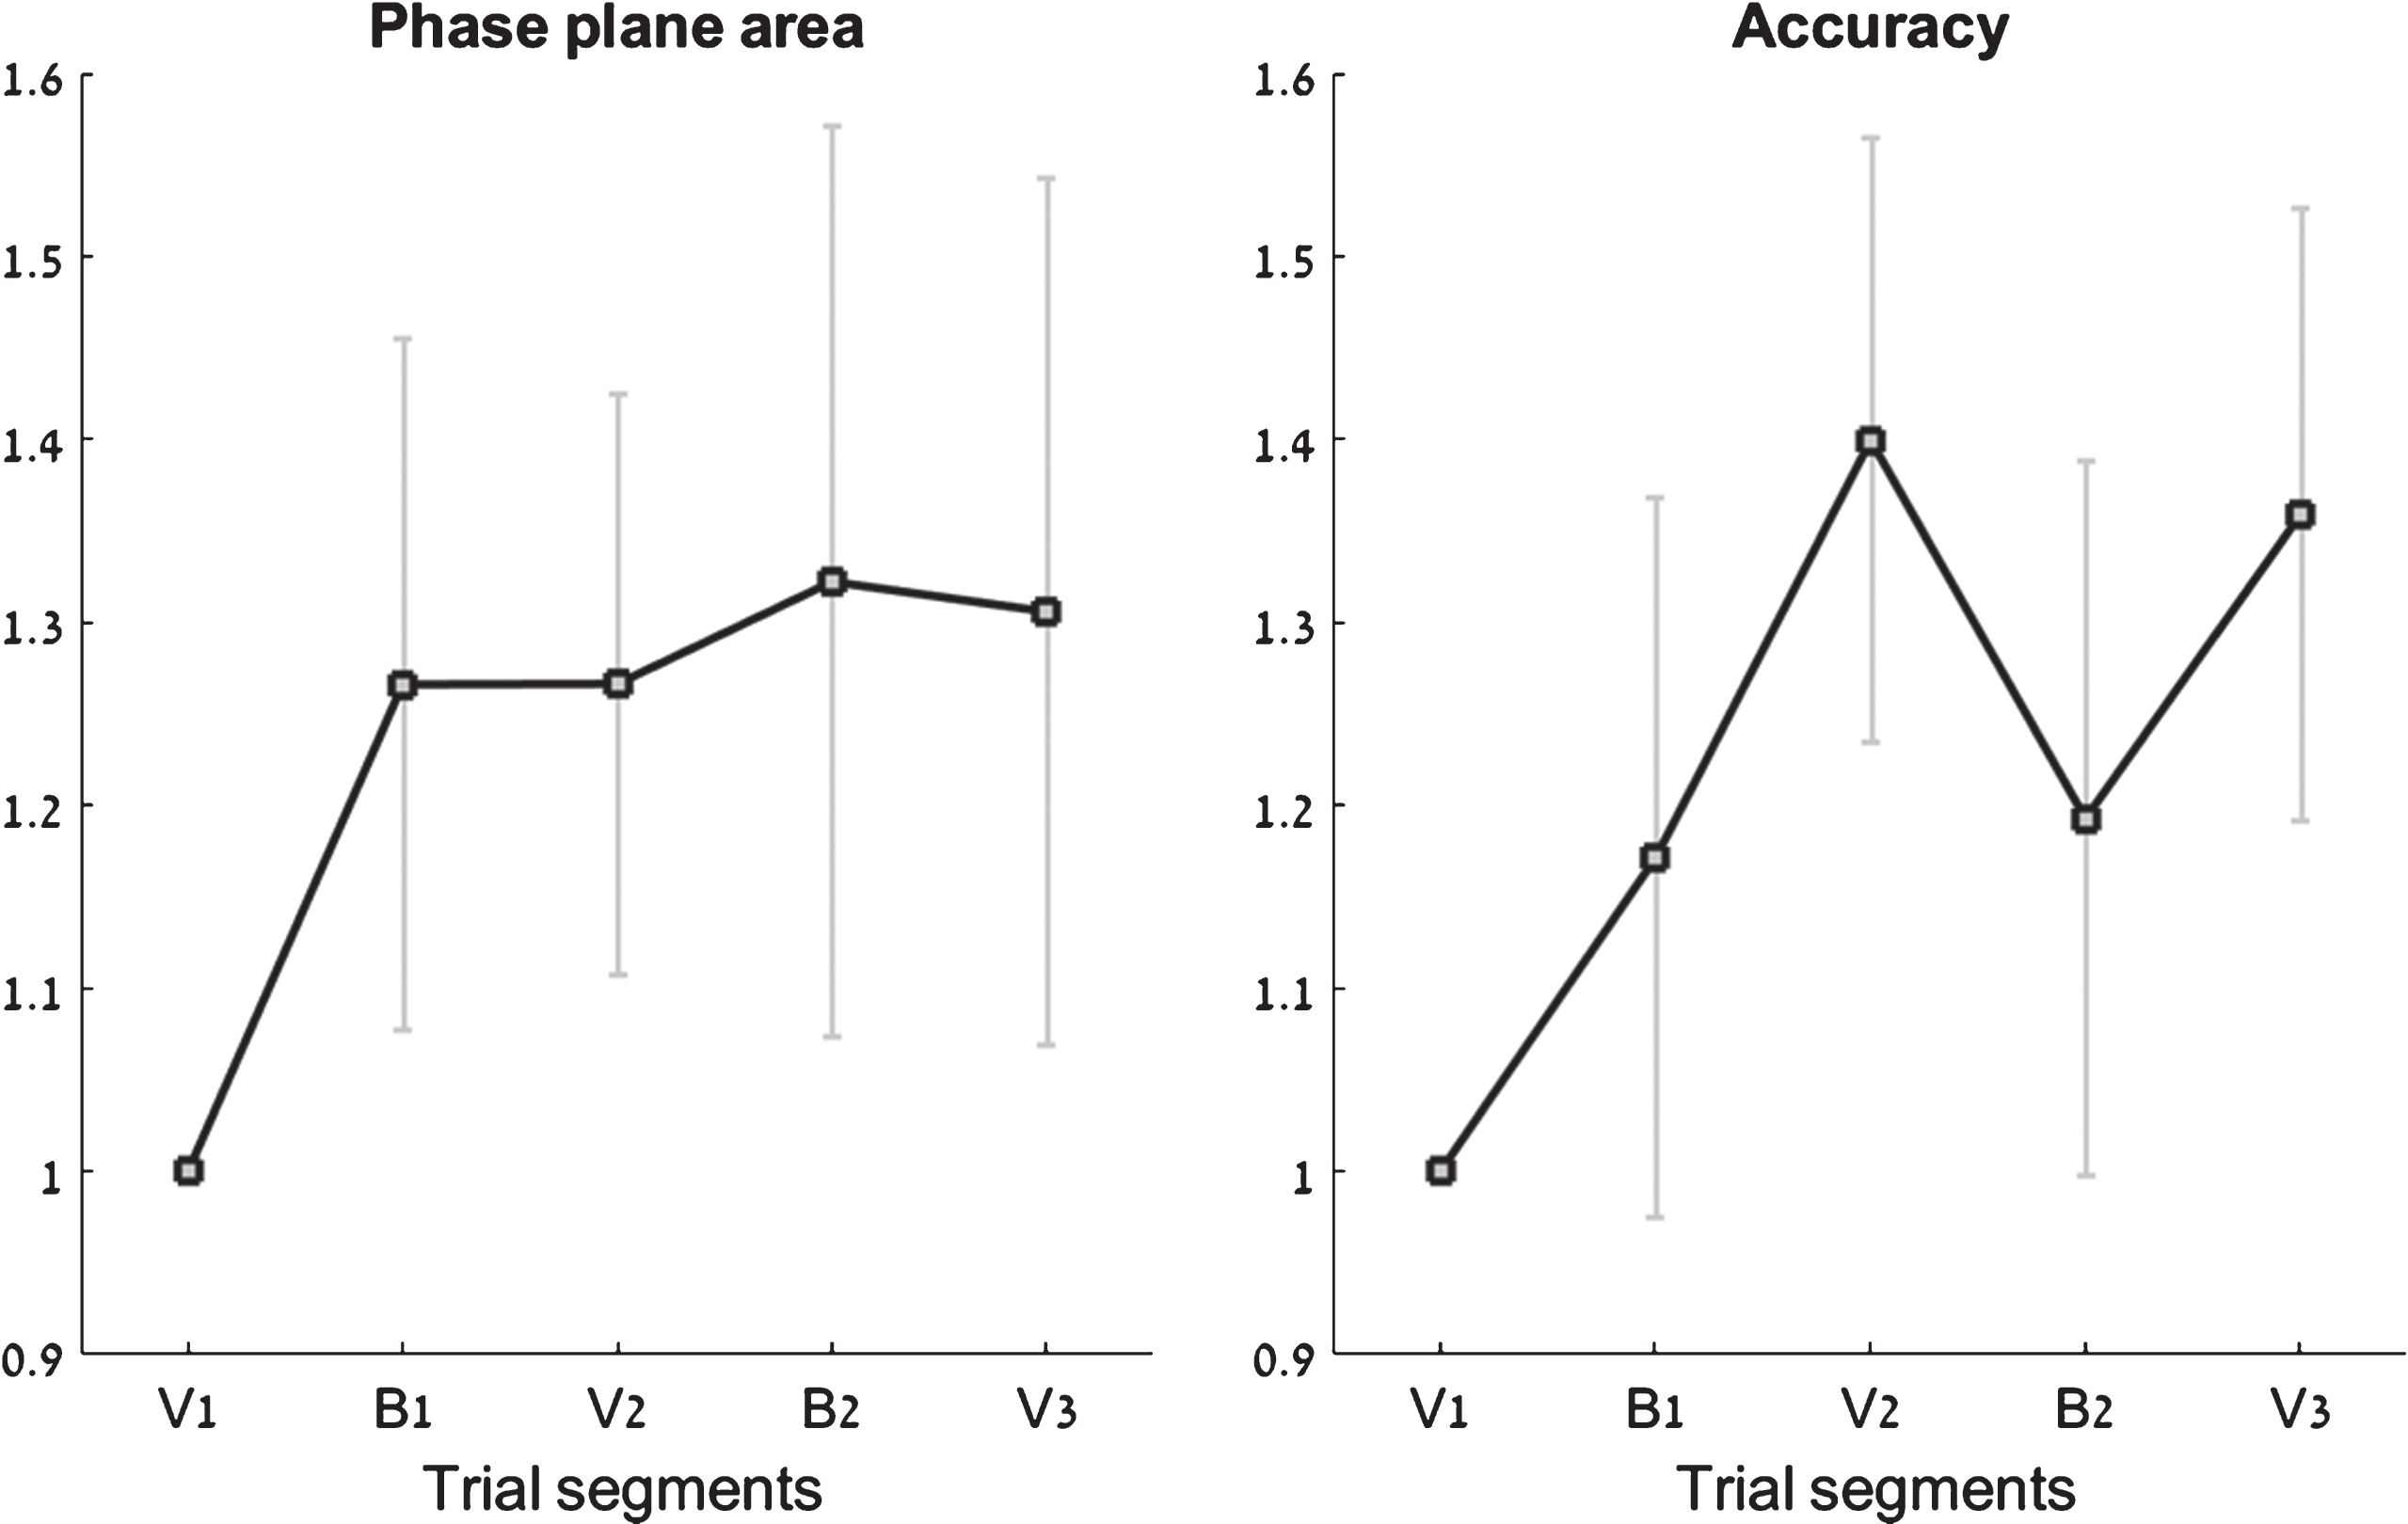 Performance across the five trial segments. For clarity, all segment values are normalized by the first segment of each trial (V1). Left: Normalized phase-plane area values; Right: normalized accuracy scores. Error bars represent standard error.